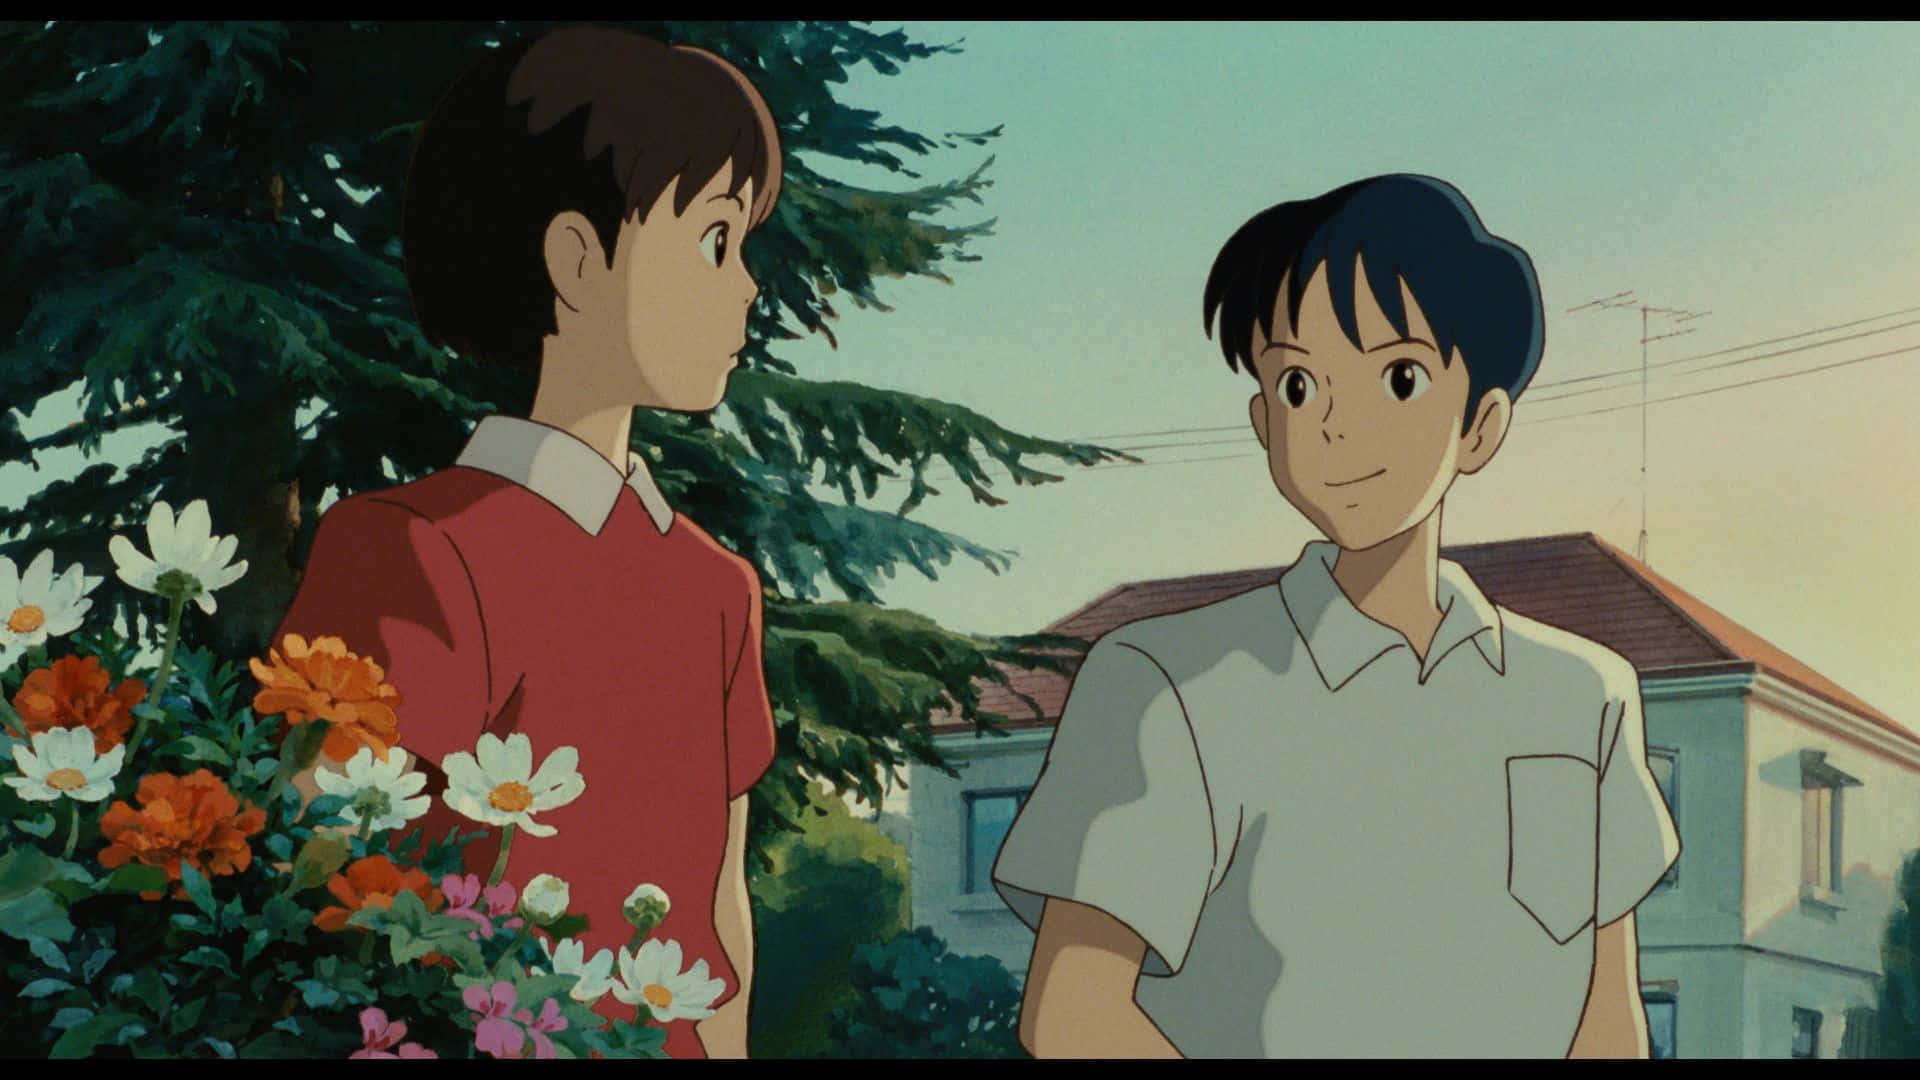 Shizuku and Seiji enjoying each other's company, exploring their dreams and talents in Whisper of the Heart. Wallpaper